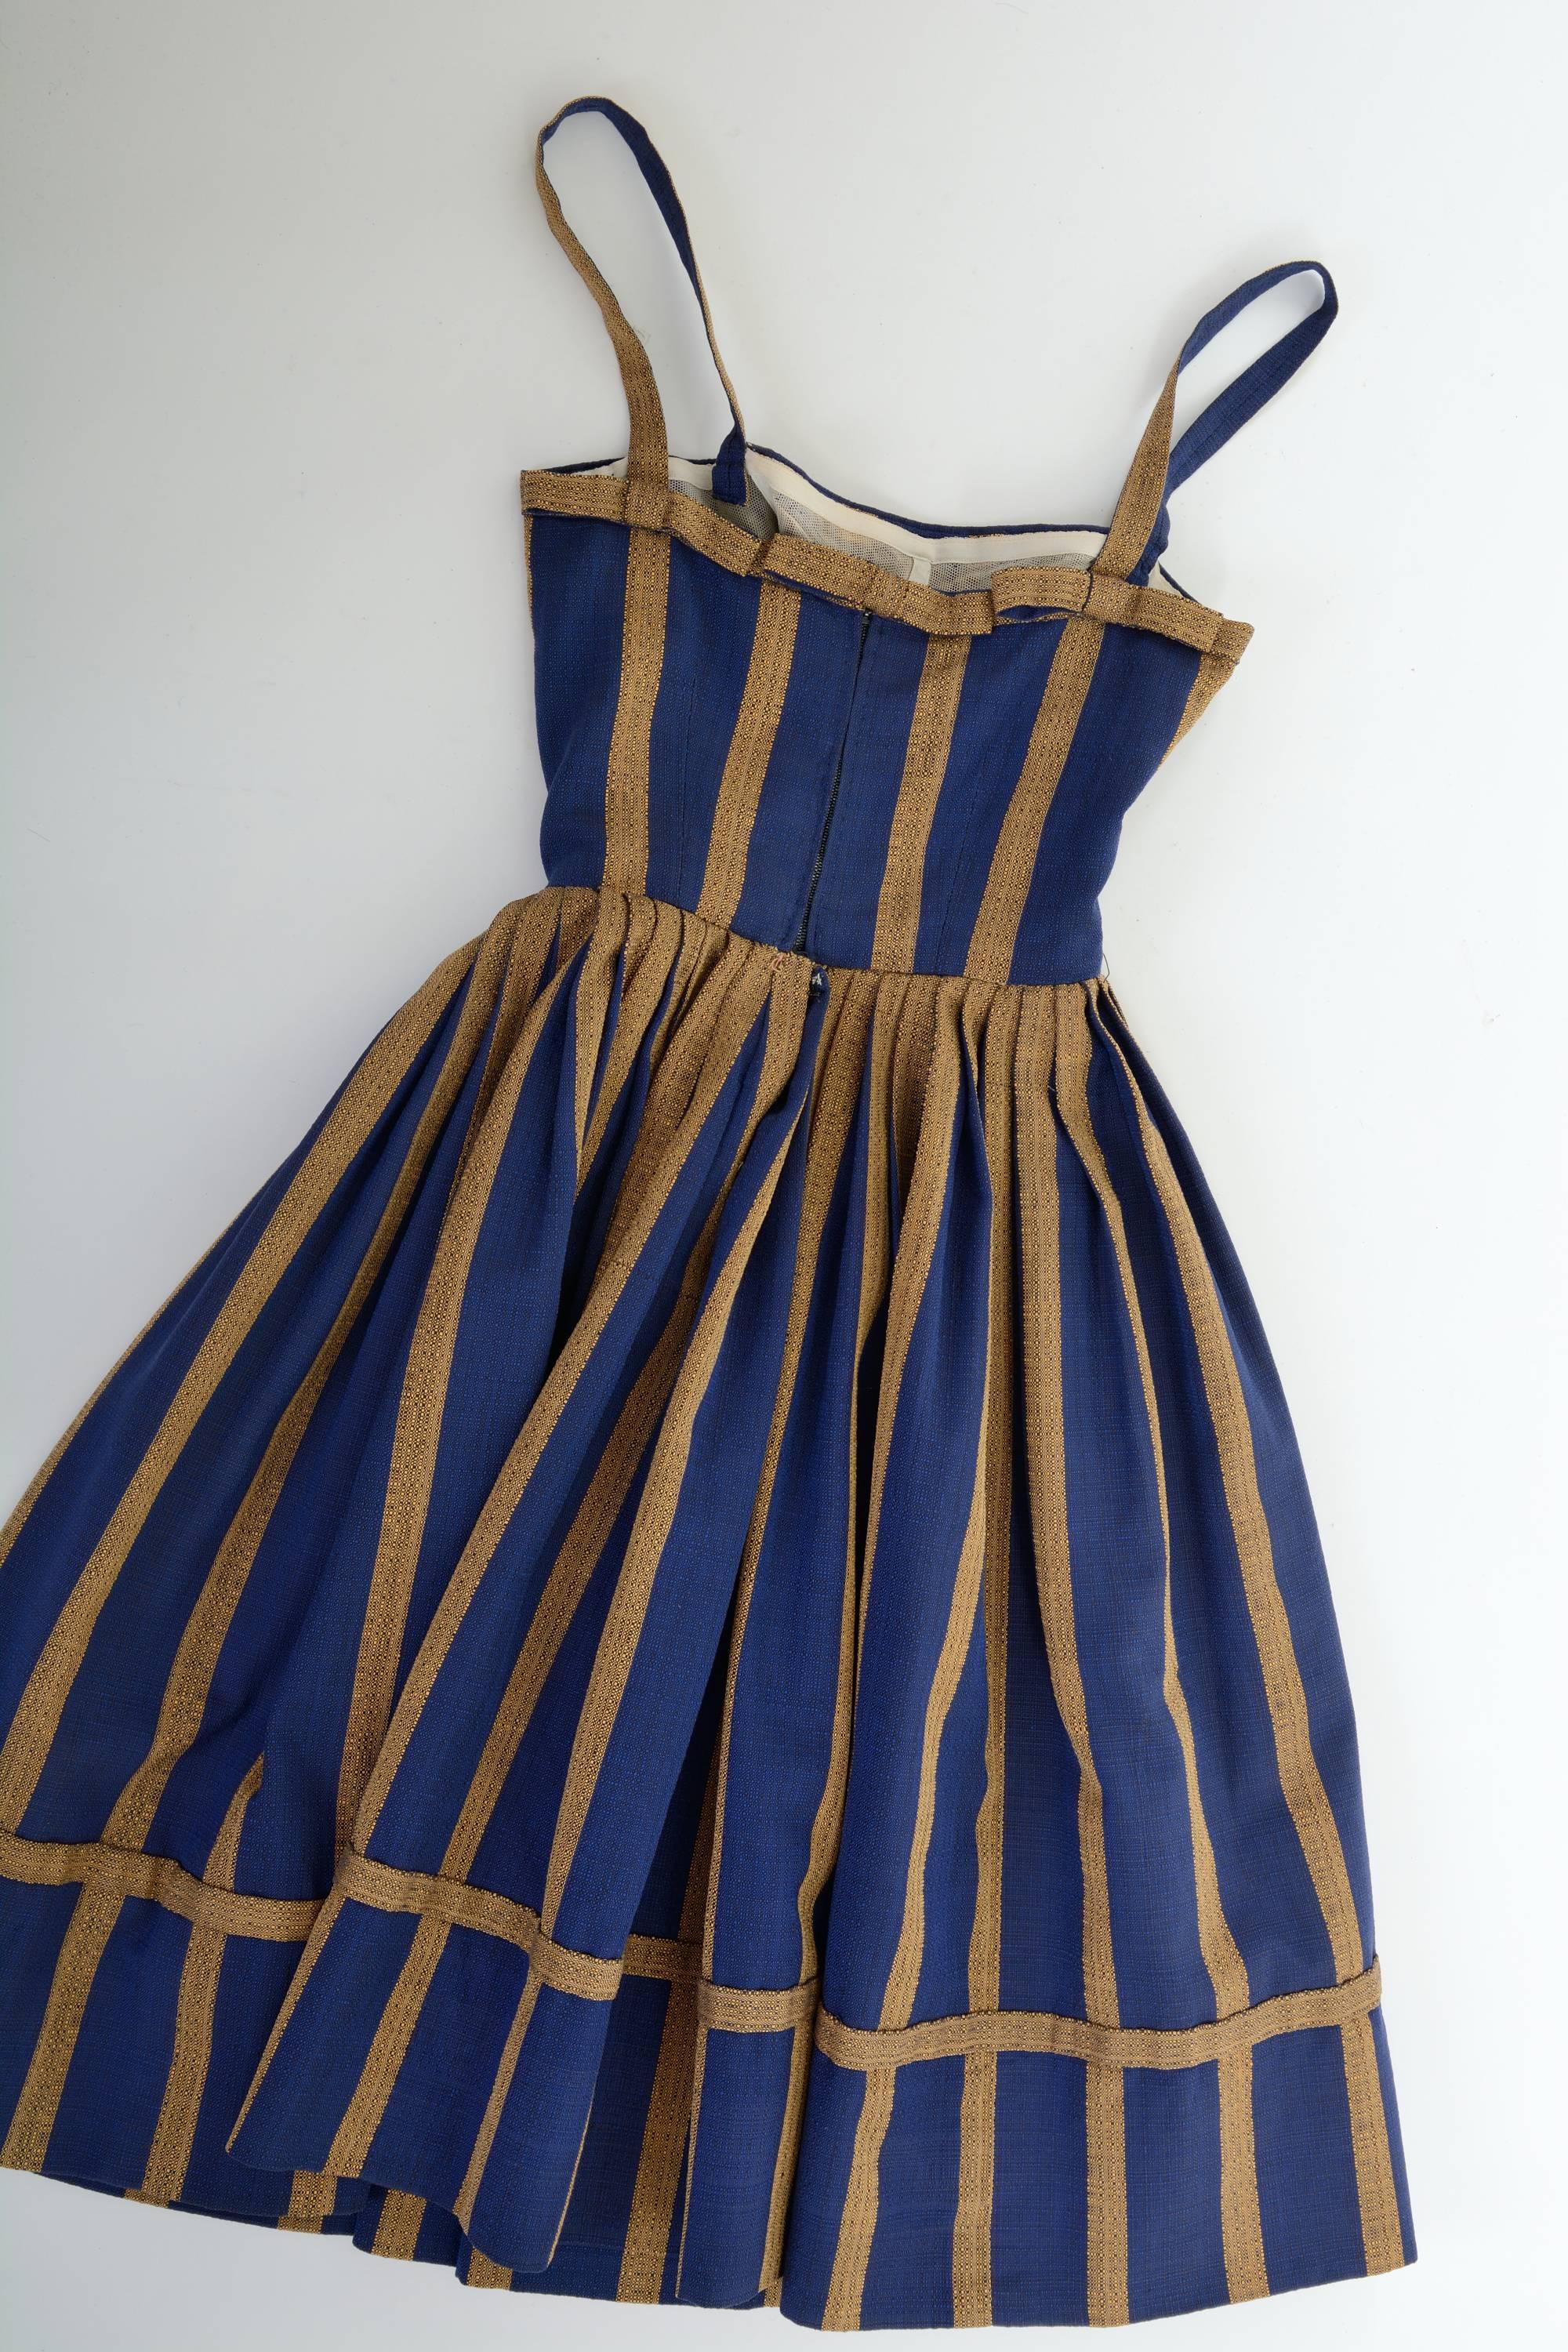 1950s Striped Cotton Spaghetti Strap Circle Skirt Dress In Good Condition For Sale In Milan, Italy